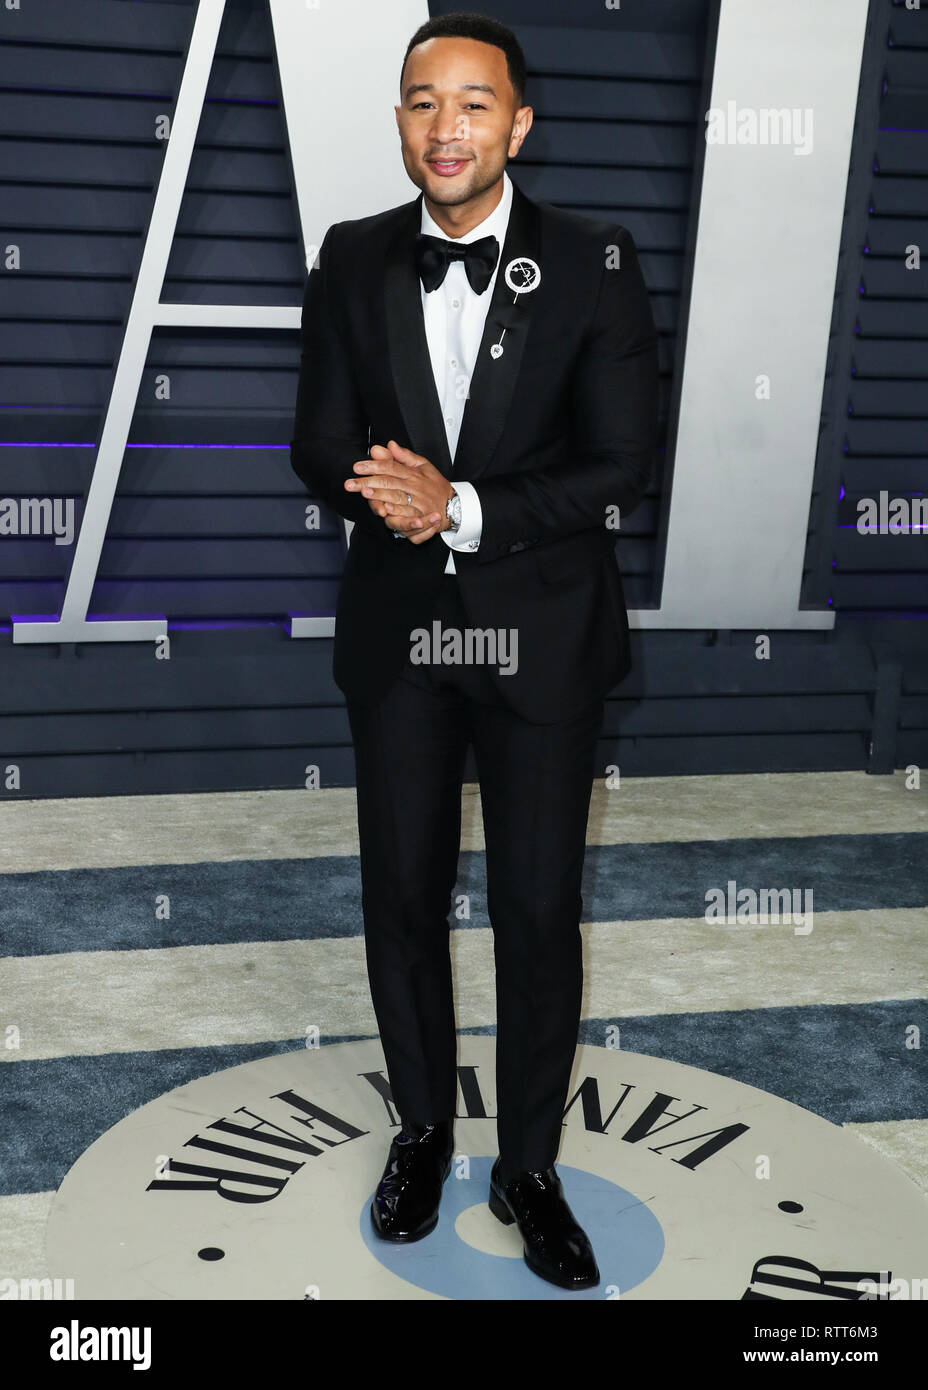 BEVERLY HILLS, LOS ANGELES, CA, USA - FEBRUARY 24: Singer John Legend  wearing a Gucci tux, Christian Louboutin shoes, and a Dennis Tsuii pin  arrives at the 2019 Vanity Fair Oscar Party